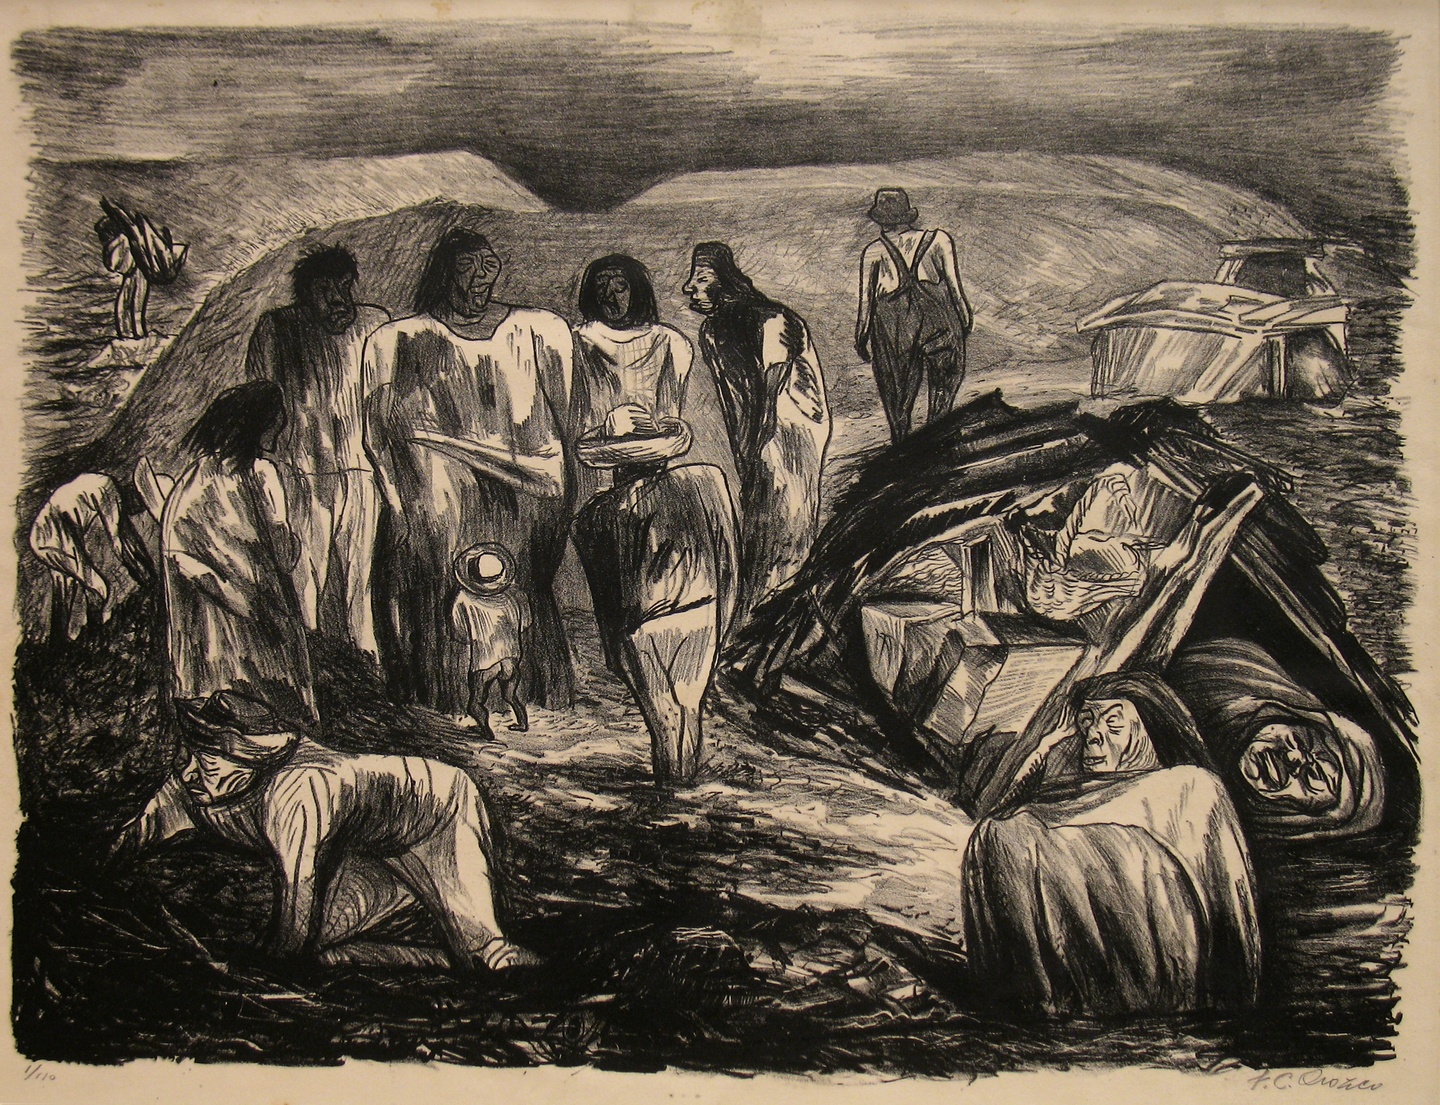 Figures standing, working in a field